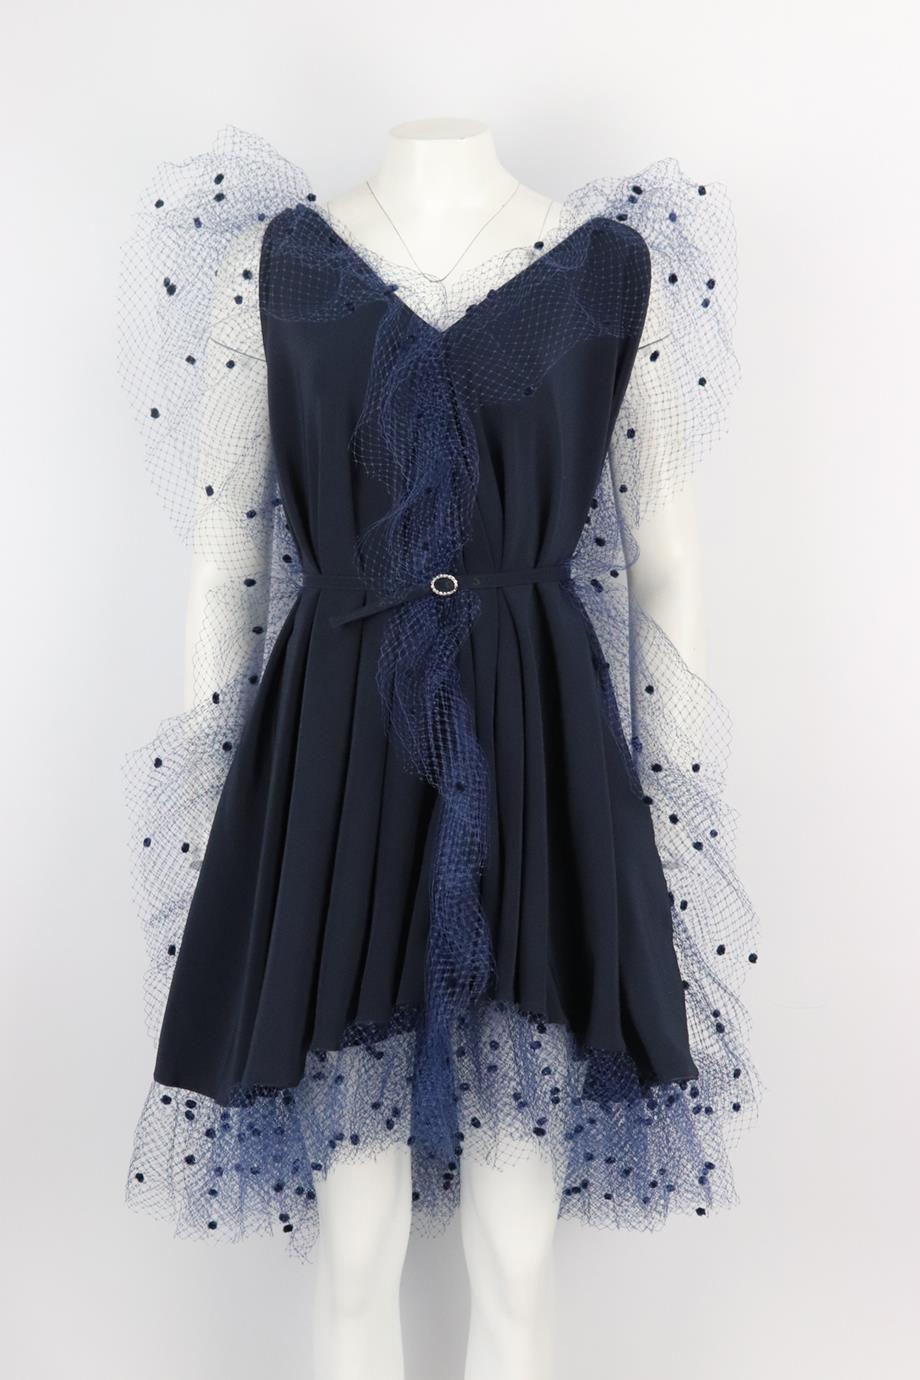 Alexis Mabille crystal embellished belted voile trimmed crepe mini dress. Navy. Sleeveless, v-neck. Slips on. 80% Acetate, 20% polyester. Size: FR 36 (UK 8, US 4, IT 40). Bust: 64 in. Waist: 80 in. Hips: 80 in. Length: 32 in. Very good condition -